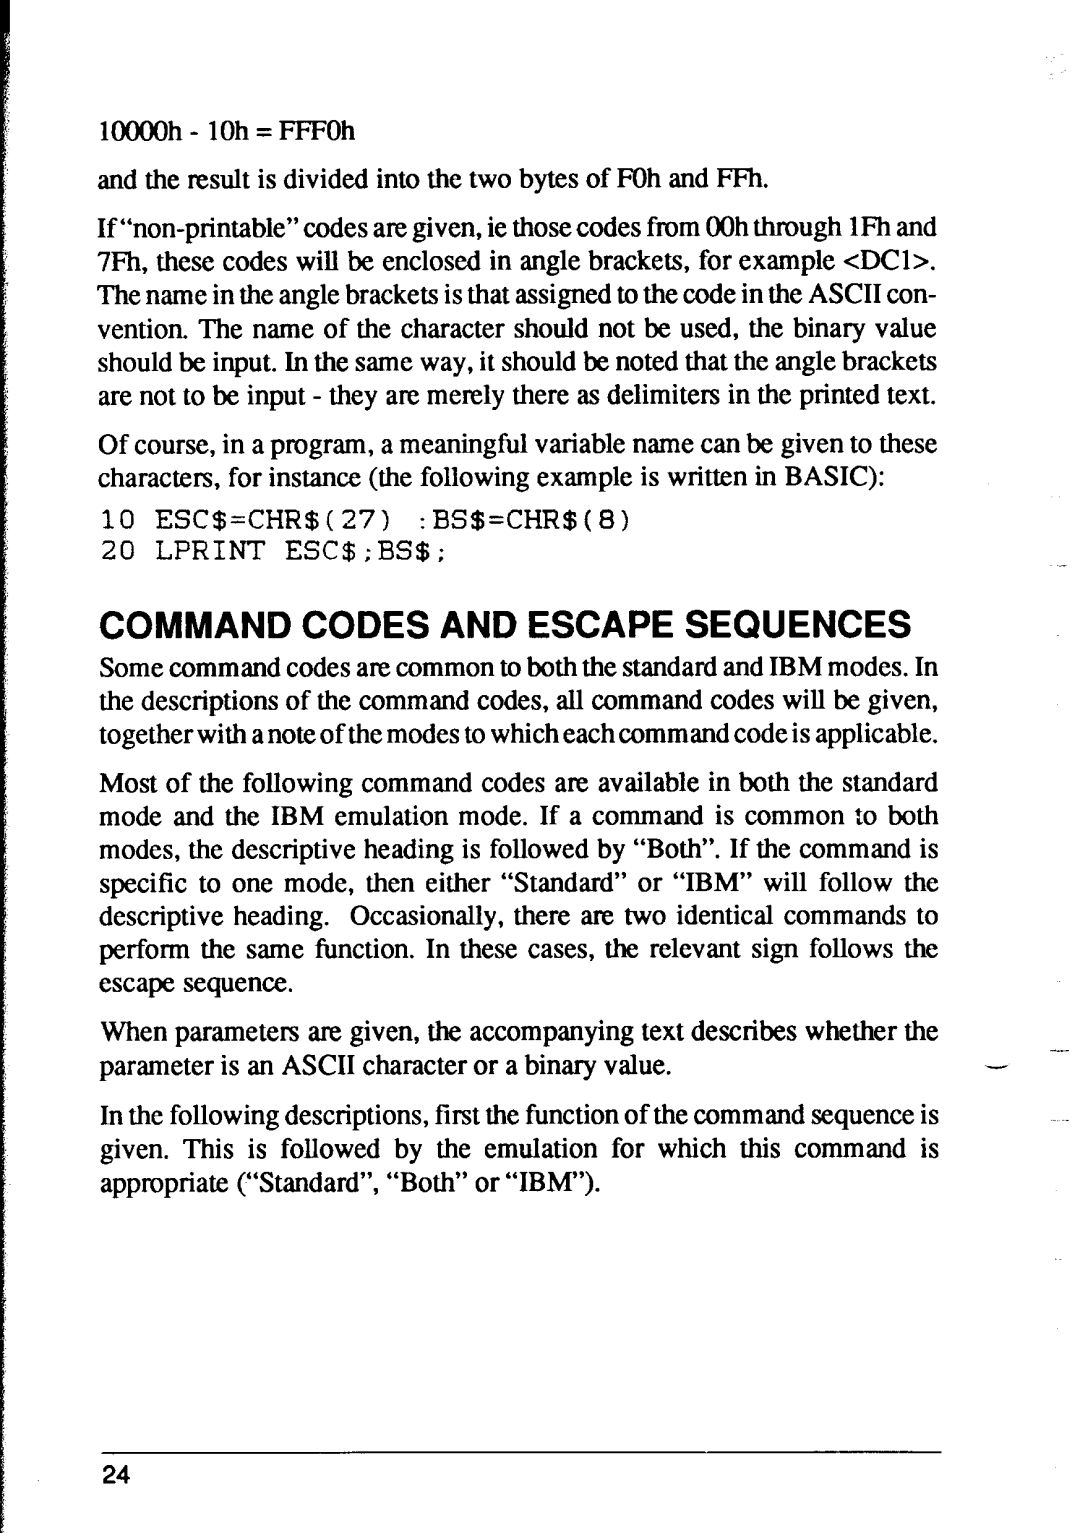 Star Micronics XR-1500, XR-1000 user manual Command Codes And Escape Sequences 